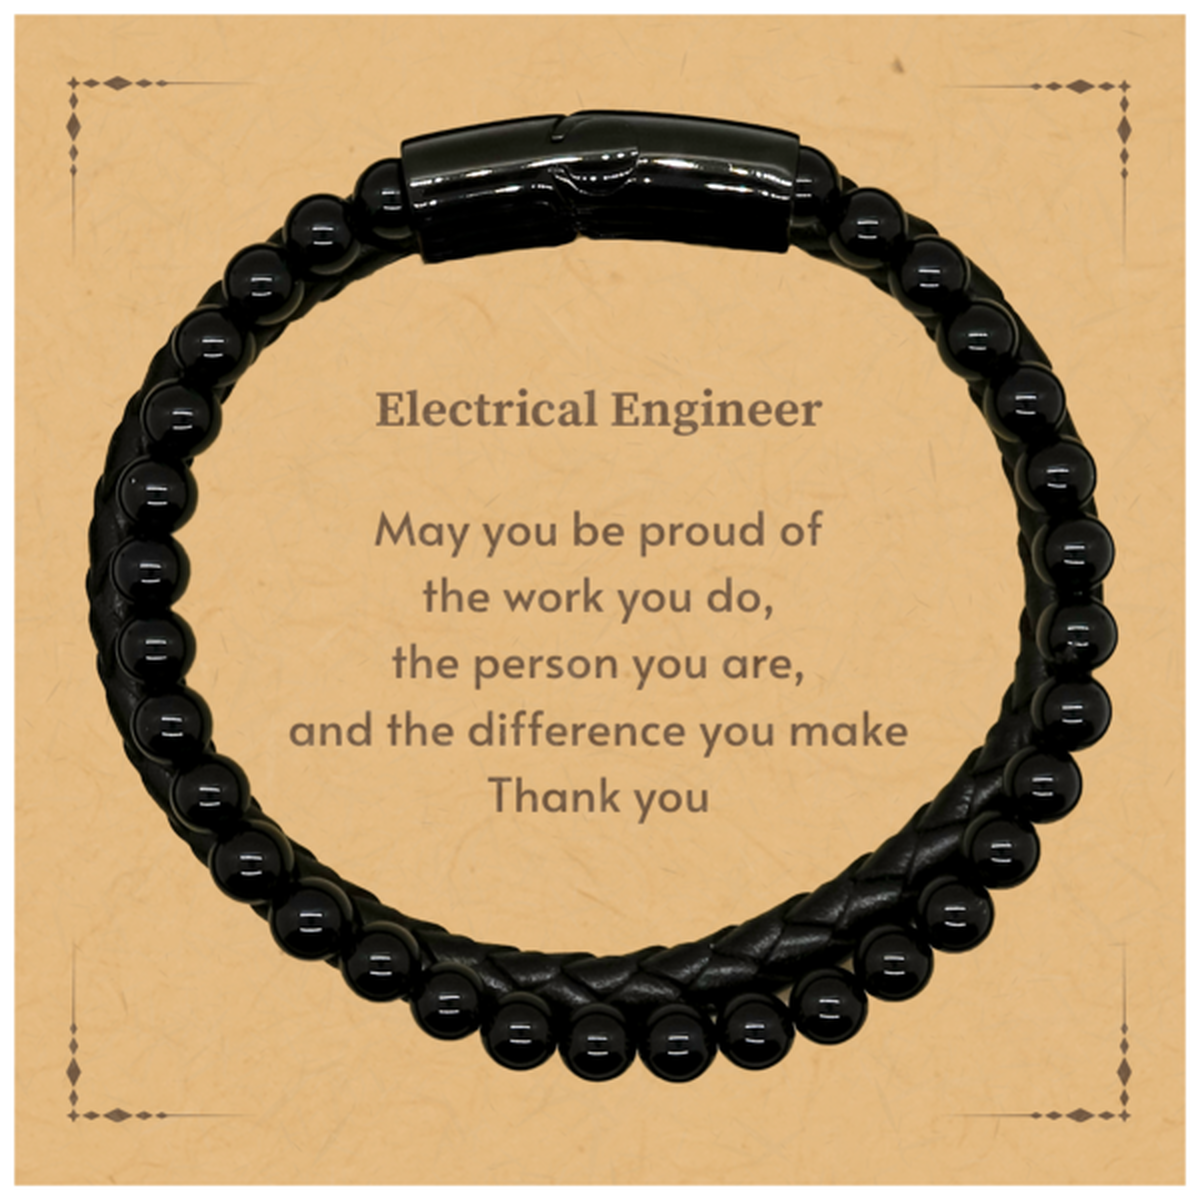 Heartwarming Stone Leather Bracelets Retirement Coworkers Gifts for Electrical Engineer, Electrical Engineer May You be proud of the work you do, the person you are Gifts for Boss Men Women Friends